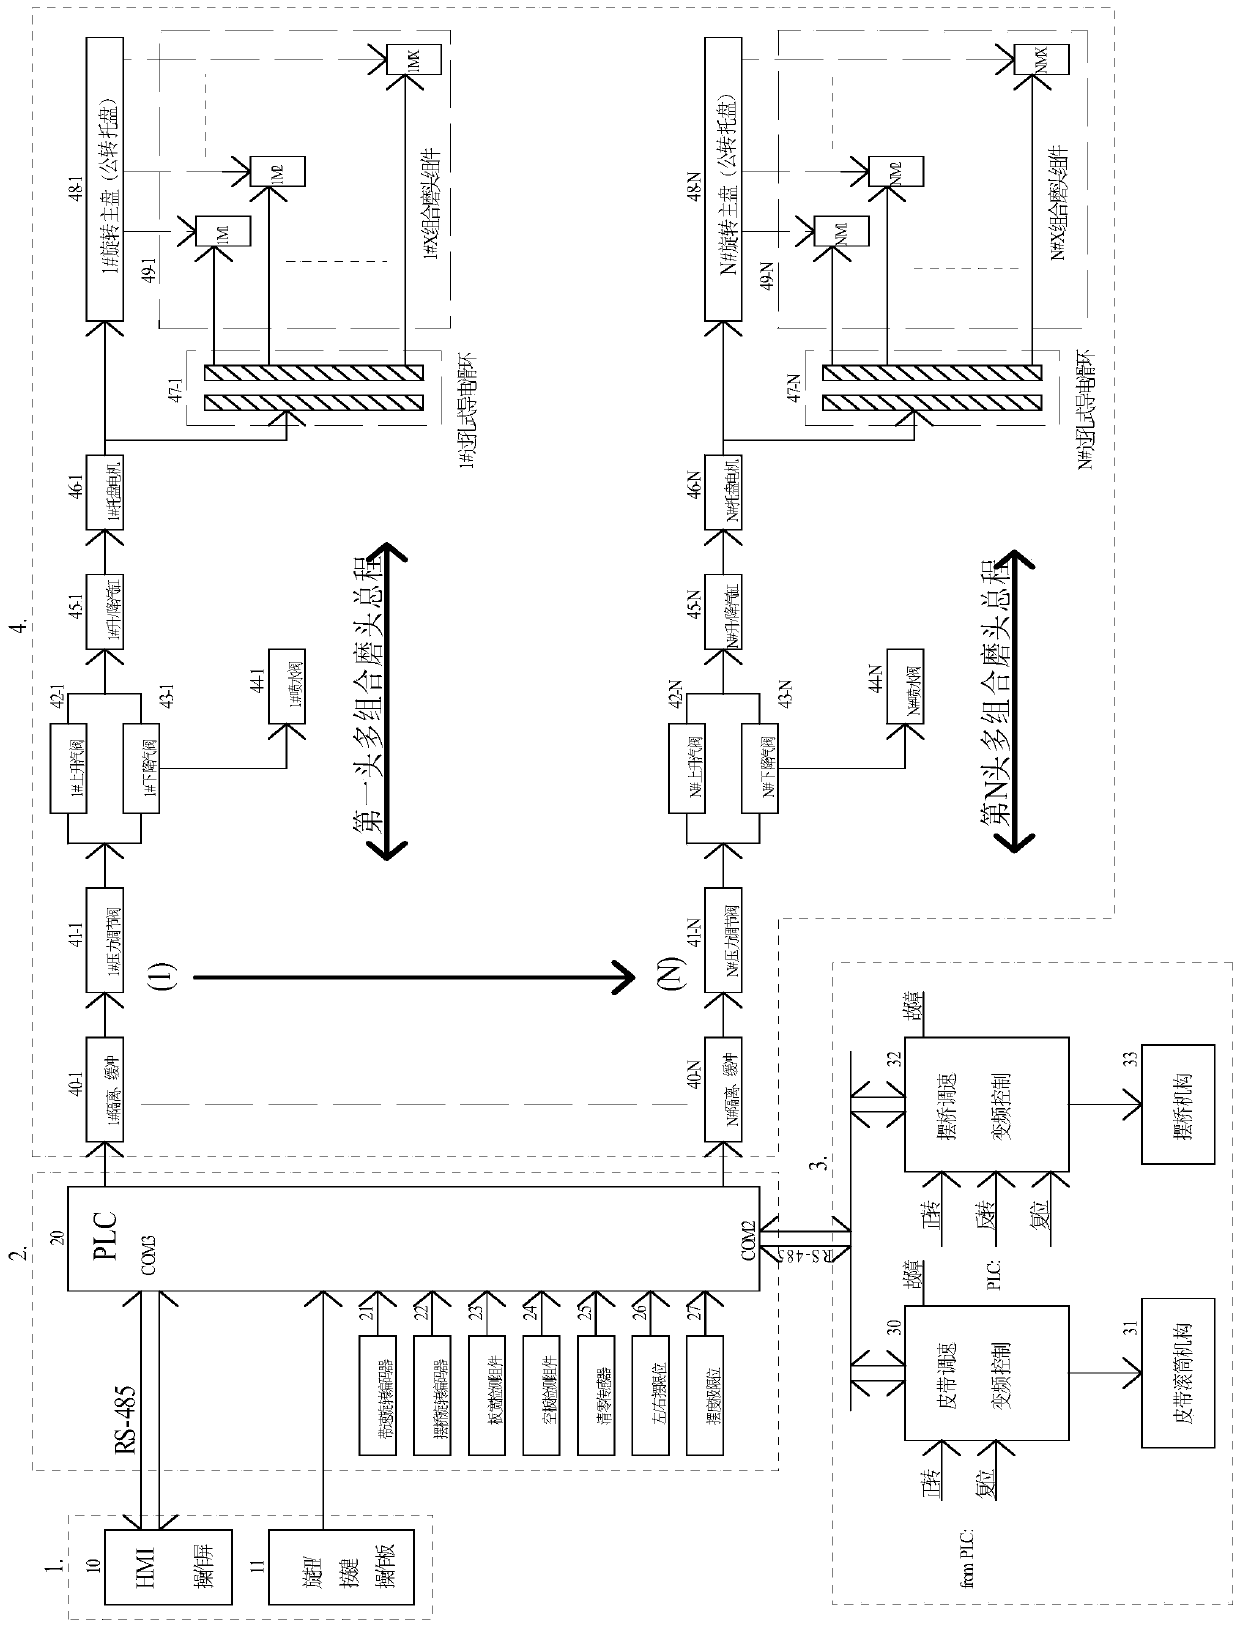 An electrical control system for a laminated multi-head multi-combination grinding and polishing machine